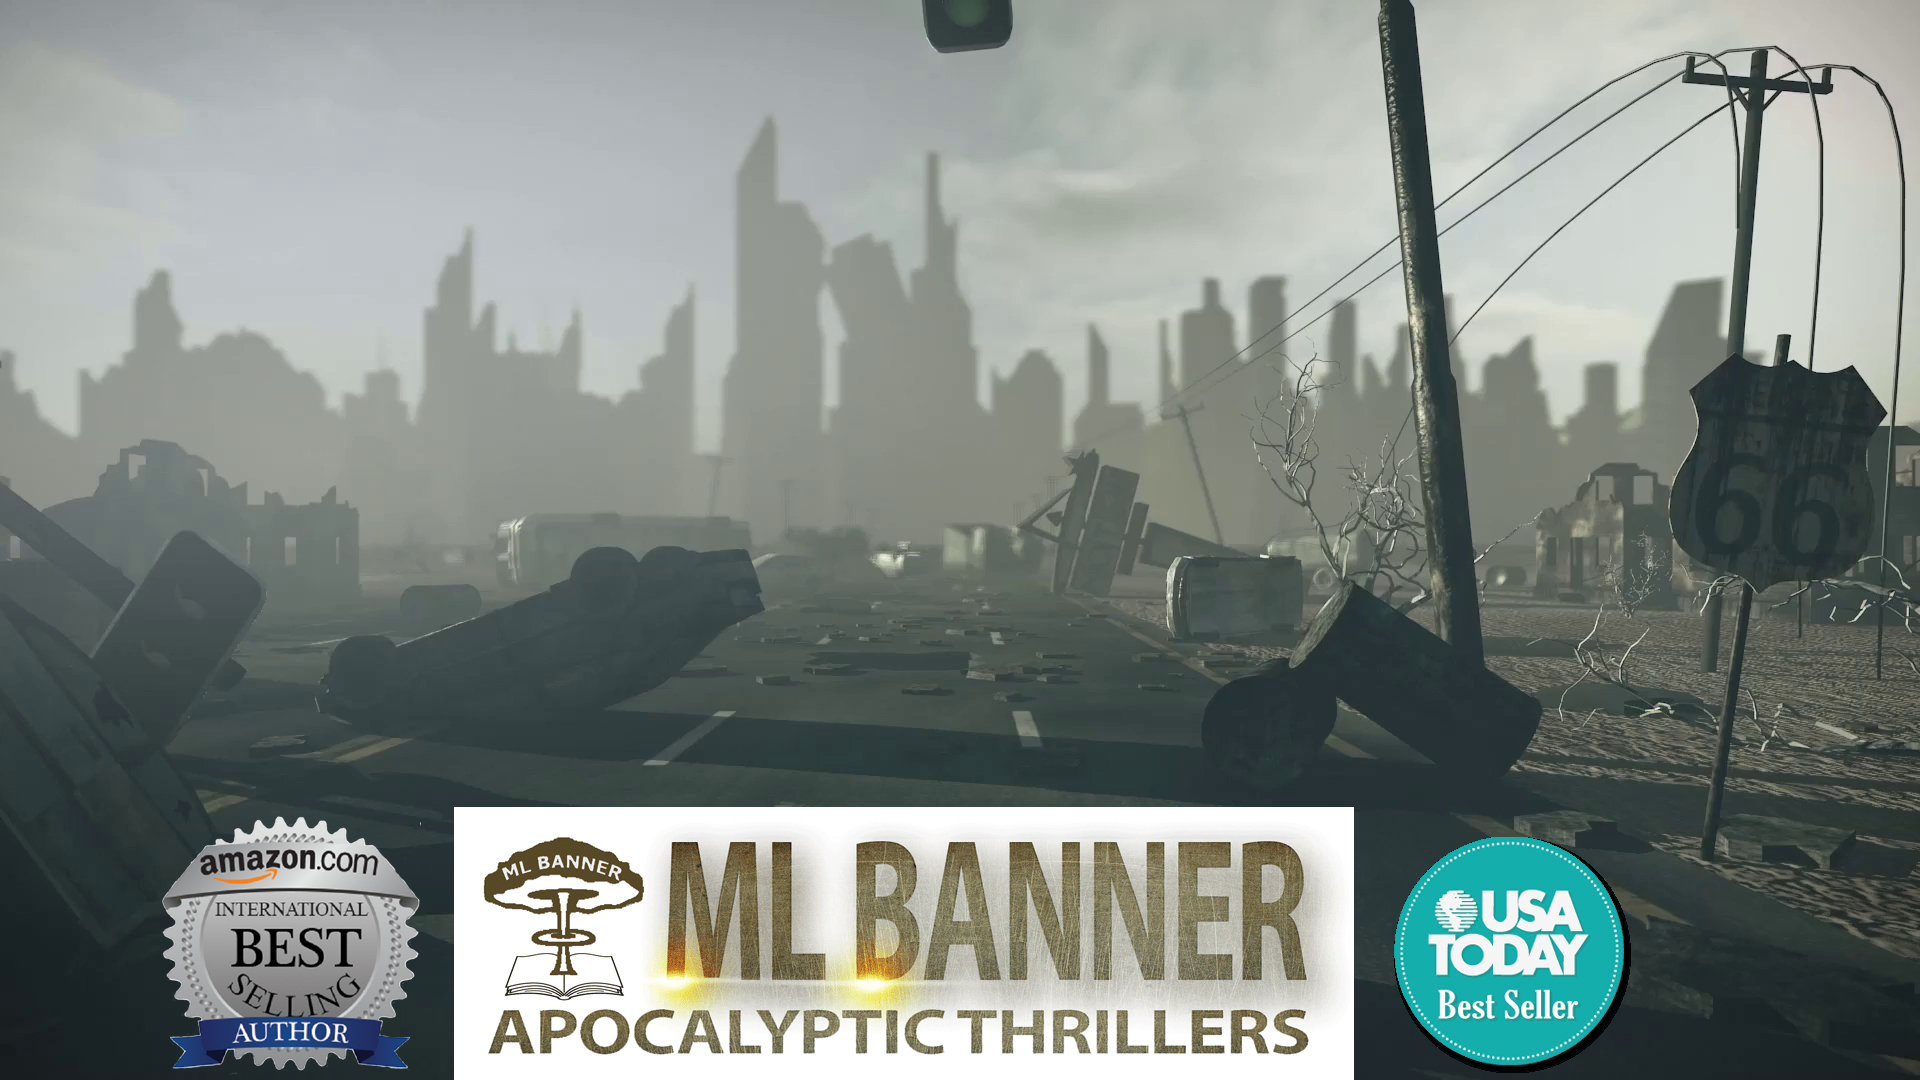 ML Banner – Author of Apocalyptic Thrillers